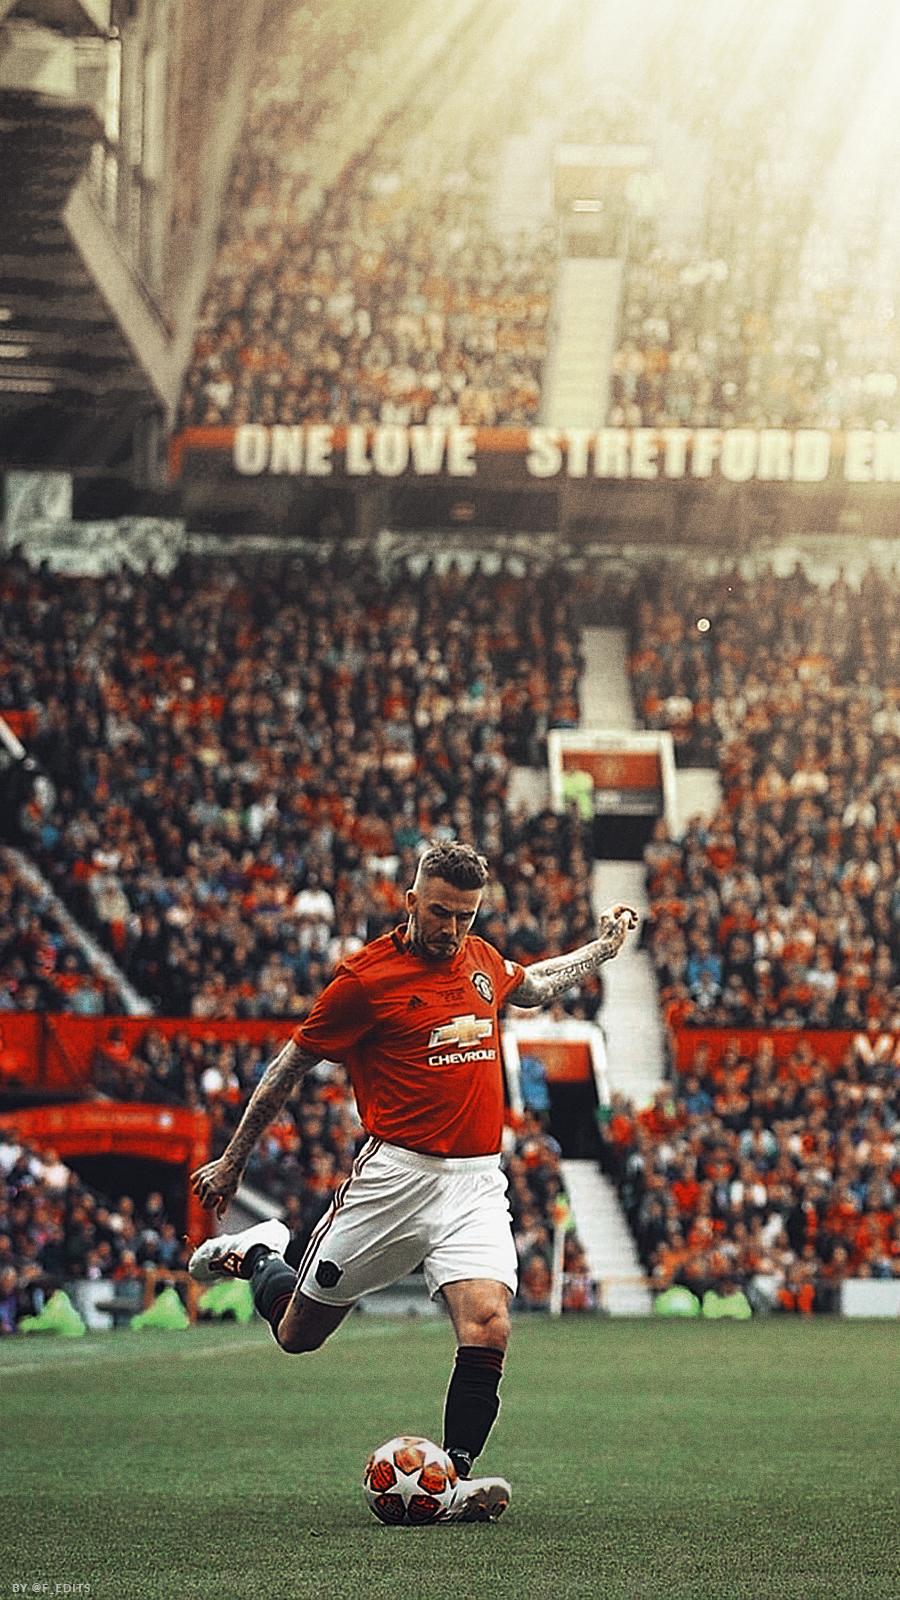 David Beckham wallpaper from the charity match at Old Trafford